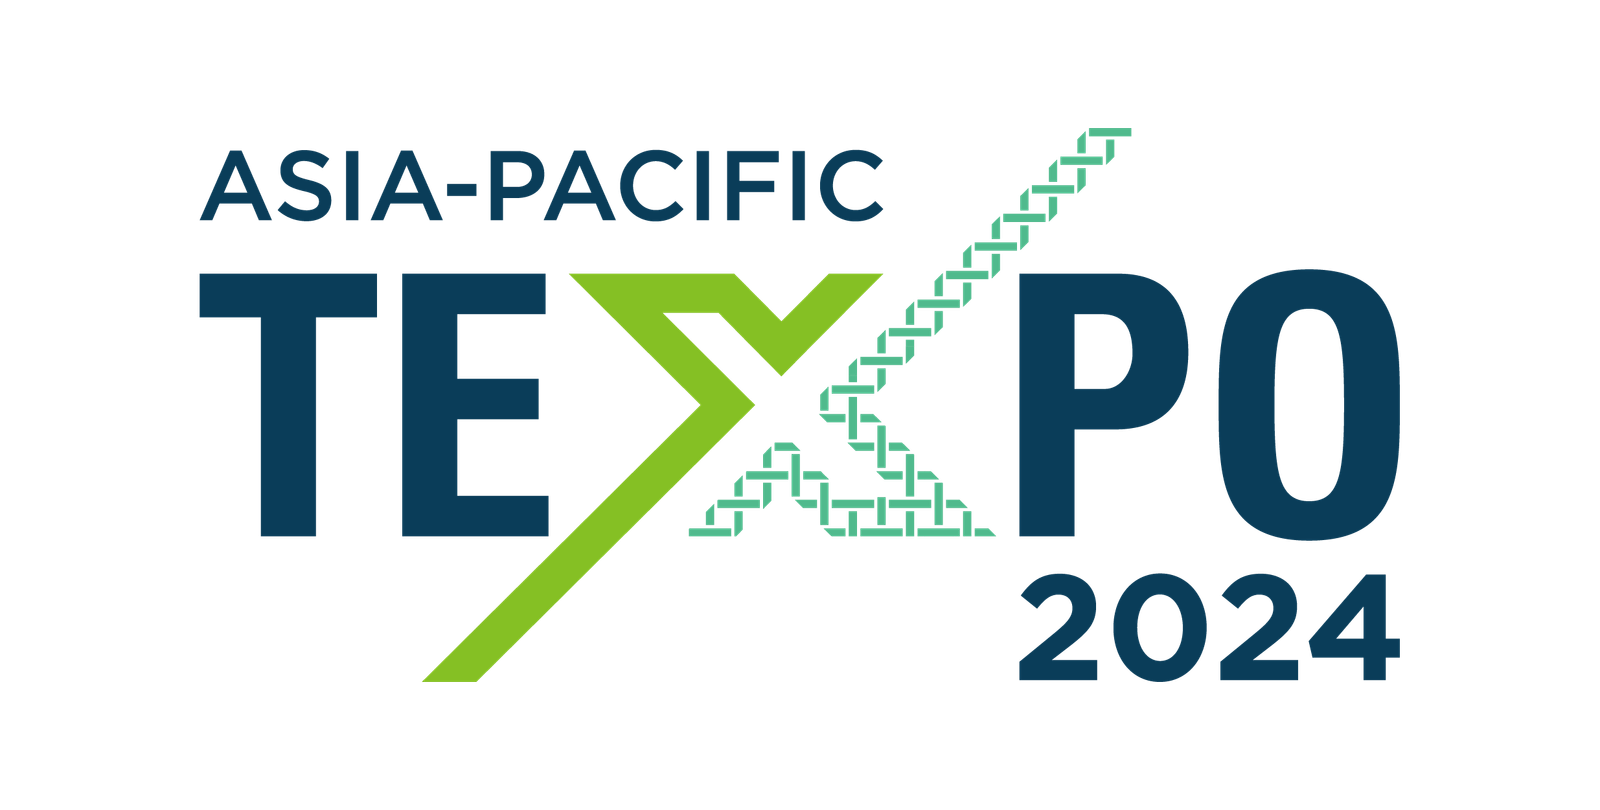 APTEXPO 2024 aims to be the key platform, to not only convene the textile and apparel industry, but also to champion the